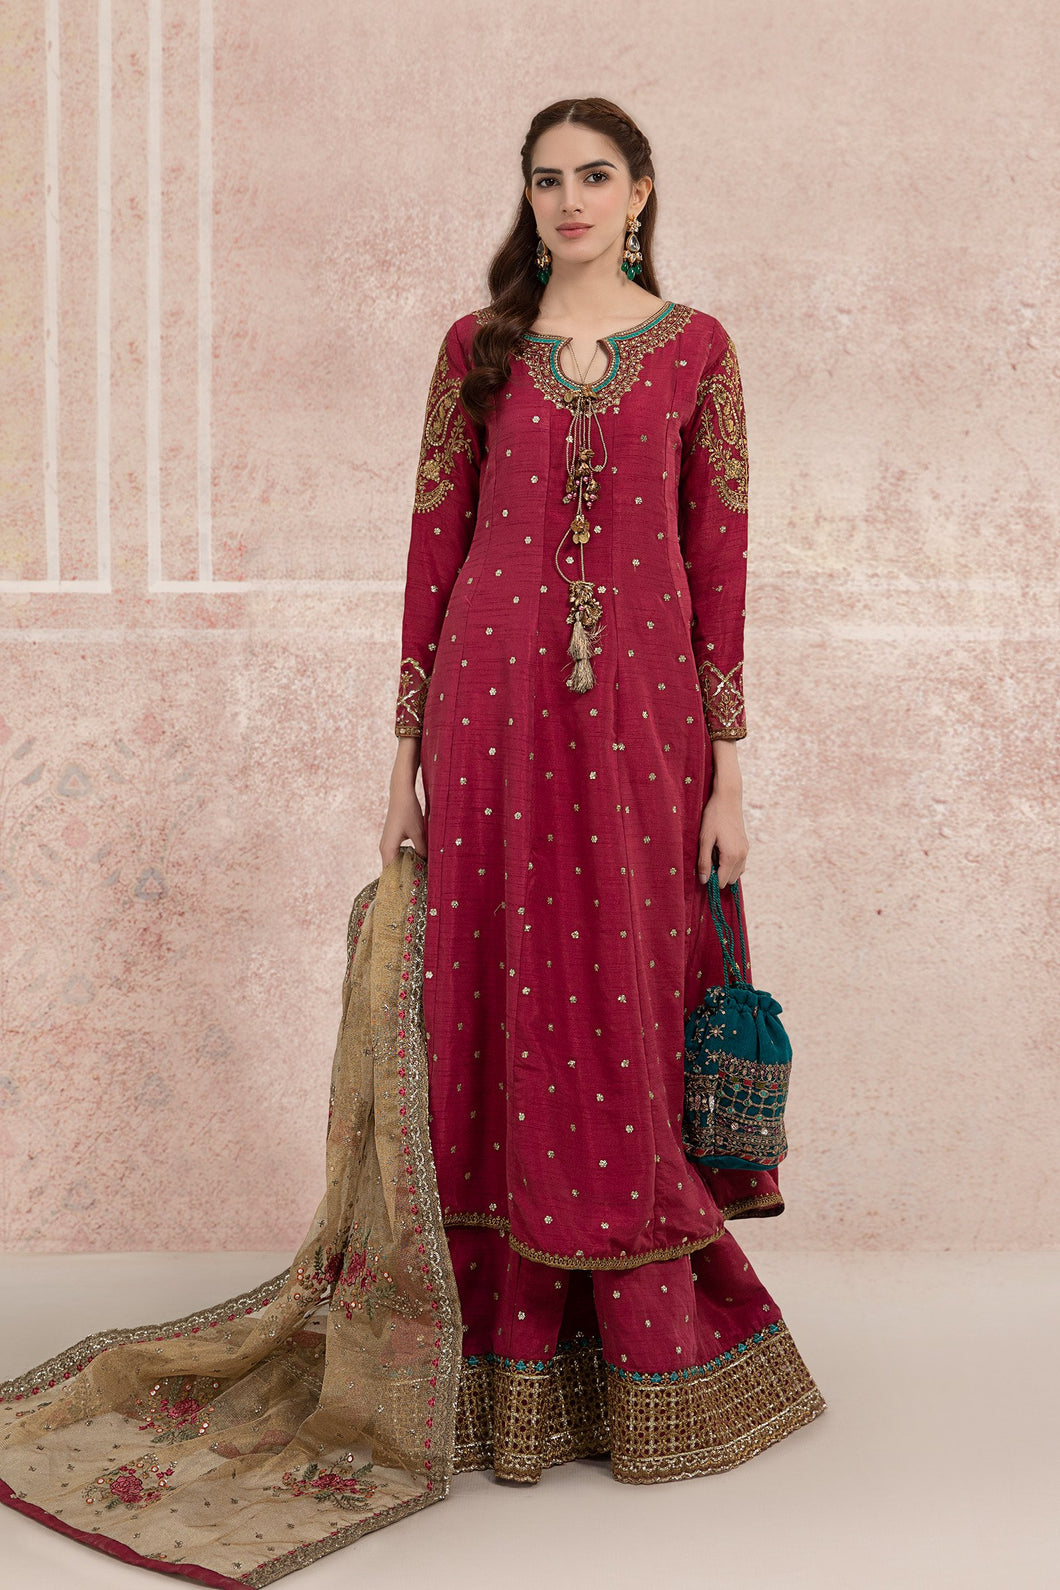 Buy Suit Pink SF-W21-10 Pink color Ready to Wear. READY MADE MARIA B BRIDAL COLLECTION UK 2021 Rejoice this season with balance of dynamic hues with  Pakistani Wedding designer clothes 2021 from the top fashion designer such as MARIA. B online in UK & USA Express shipping to London Manchester & worldwide 